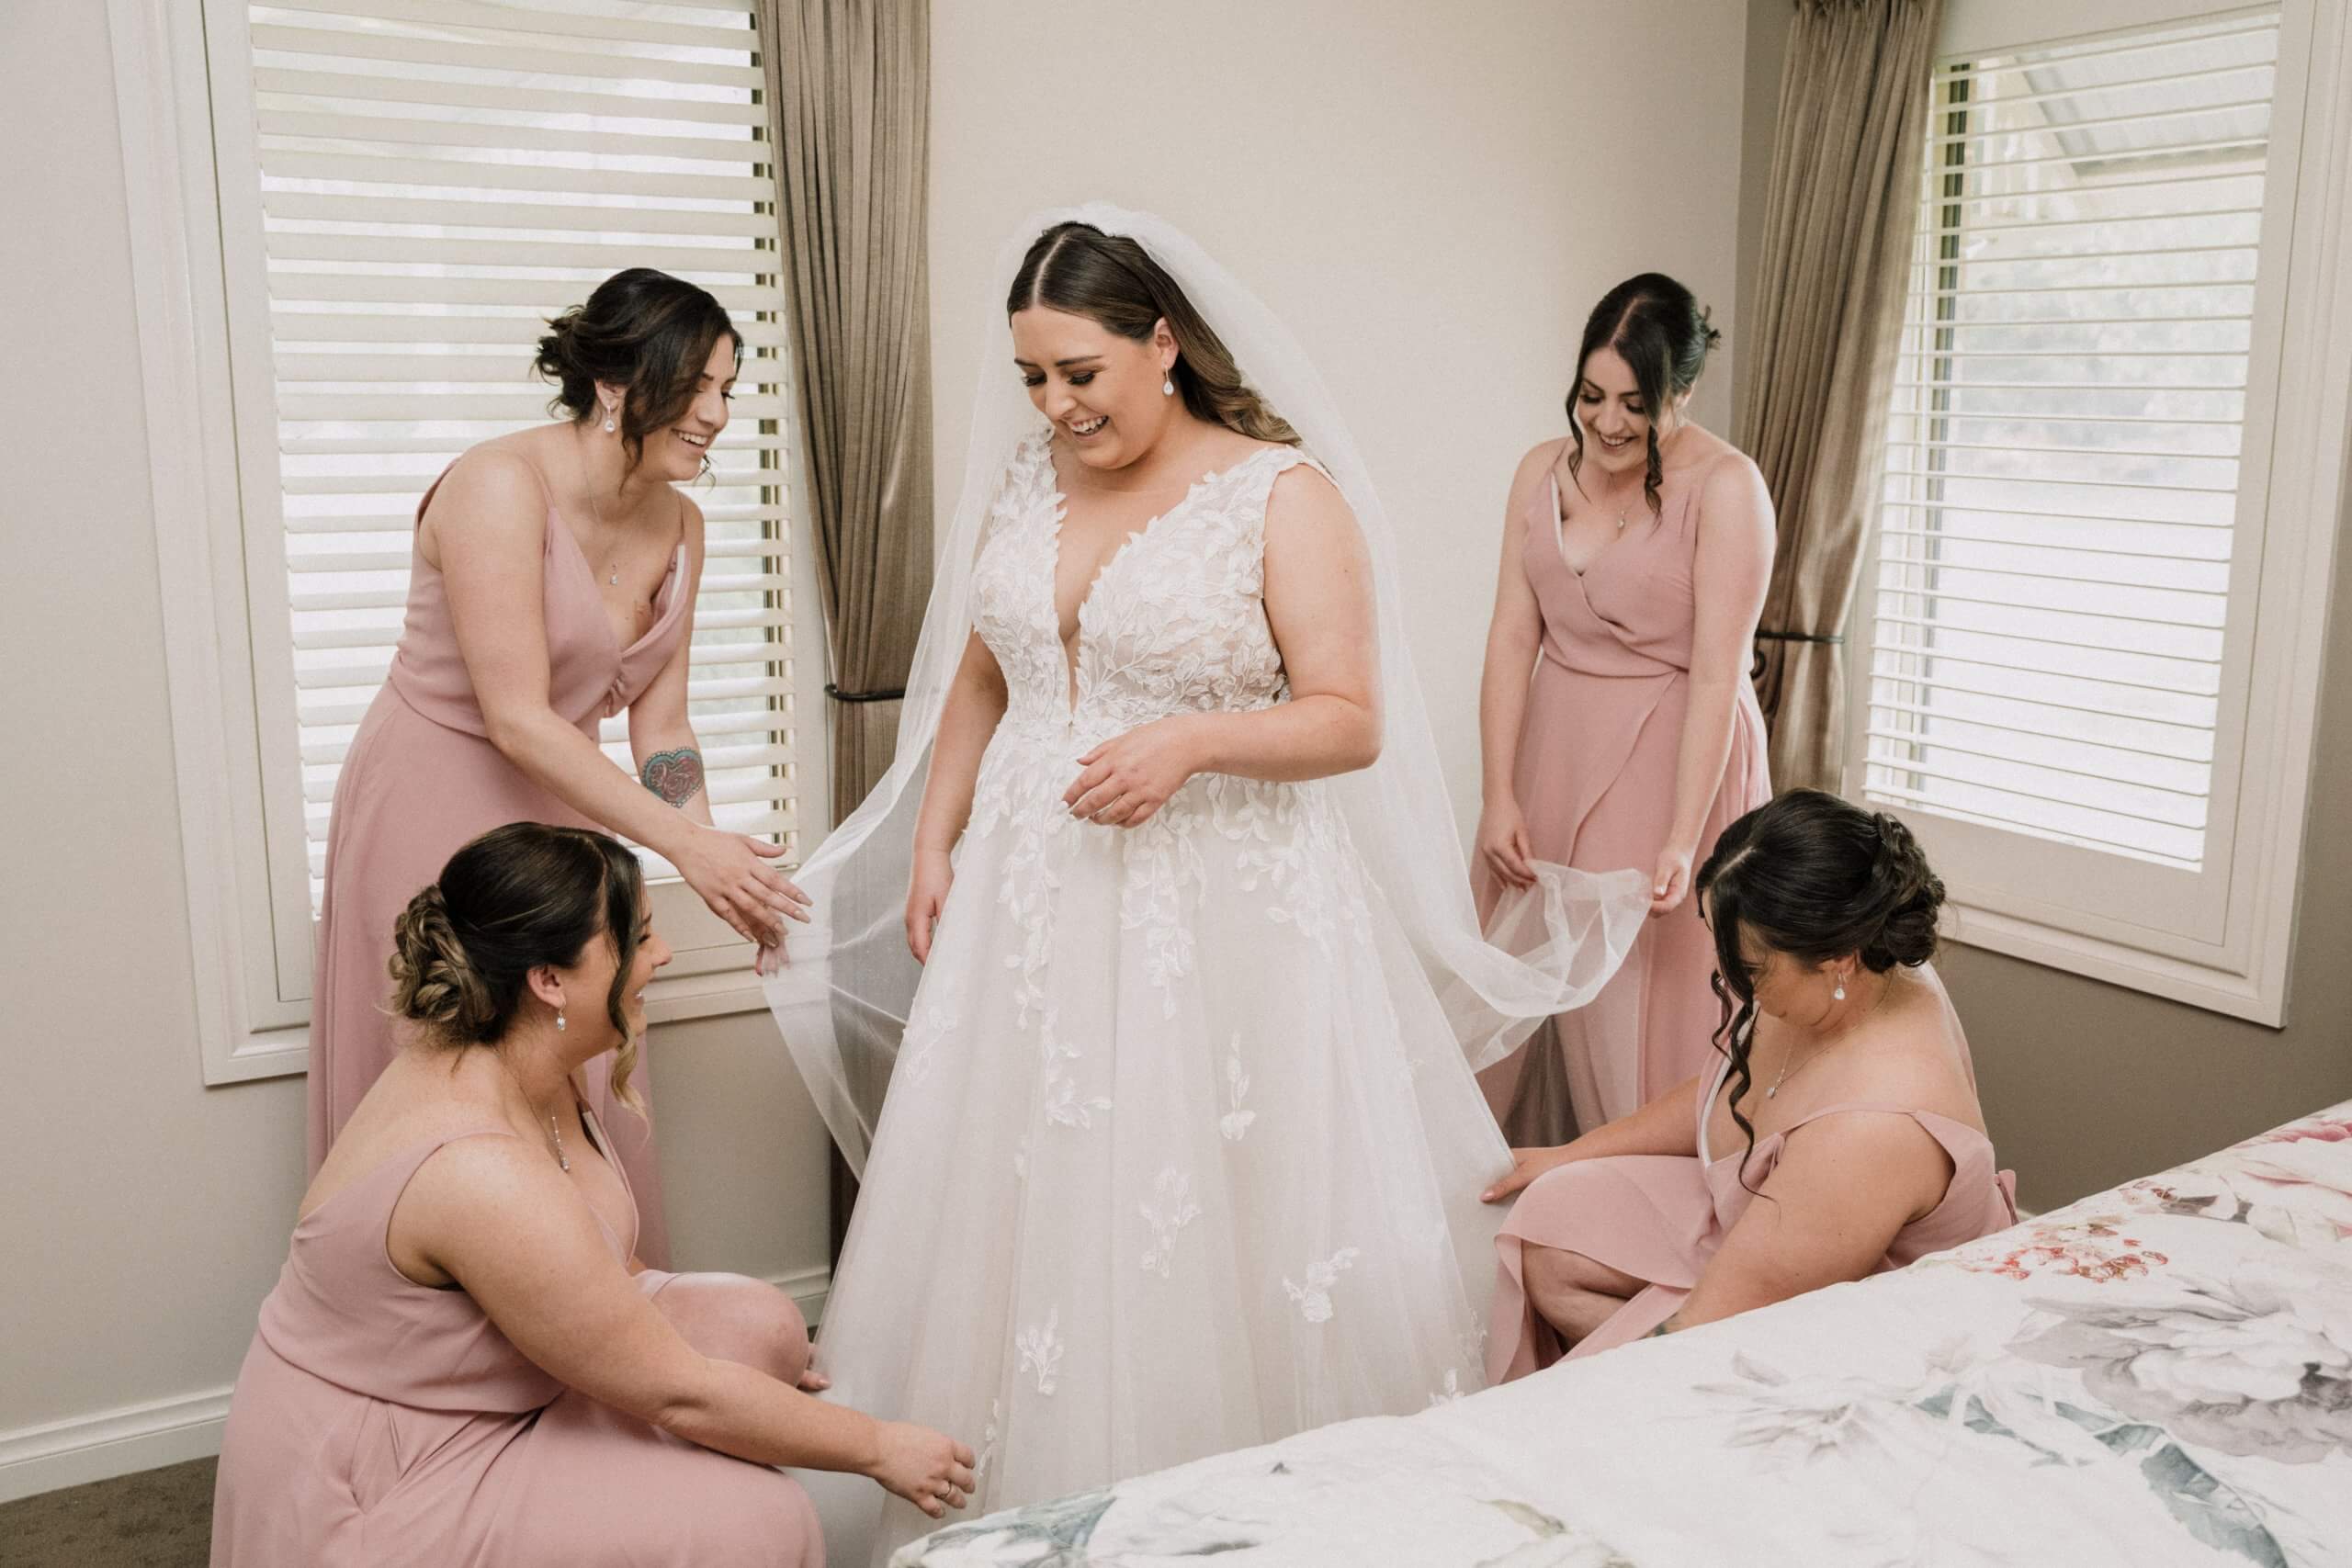 Four bridesmaids assists the bride in getting ready.